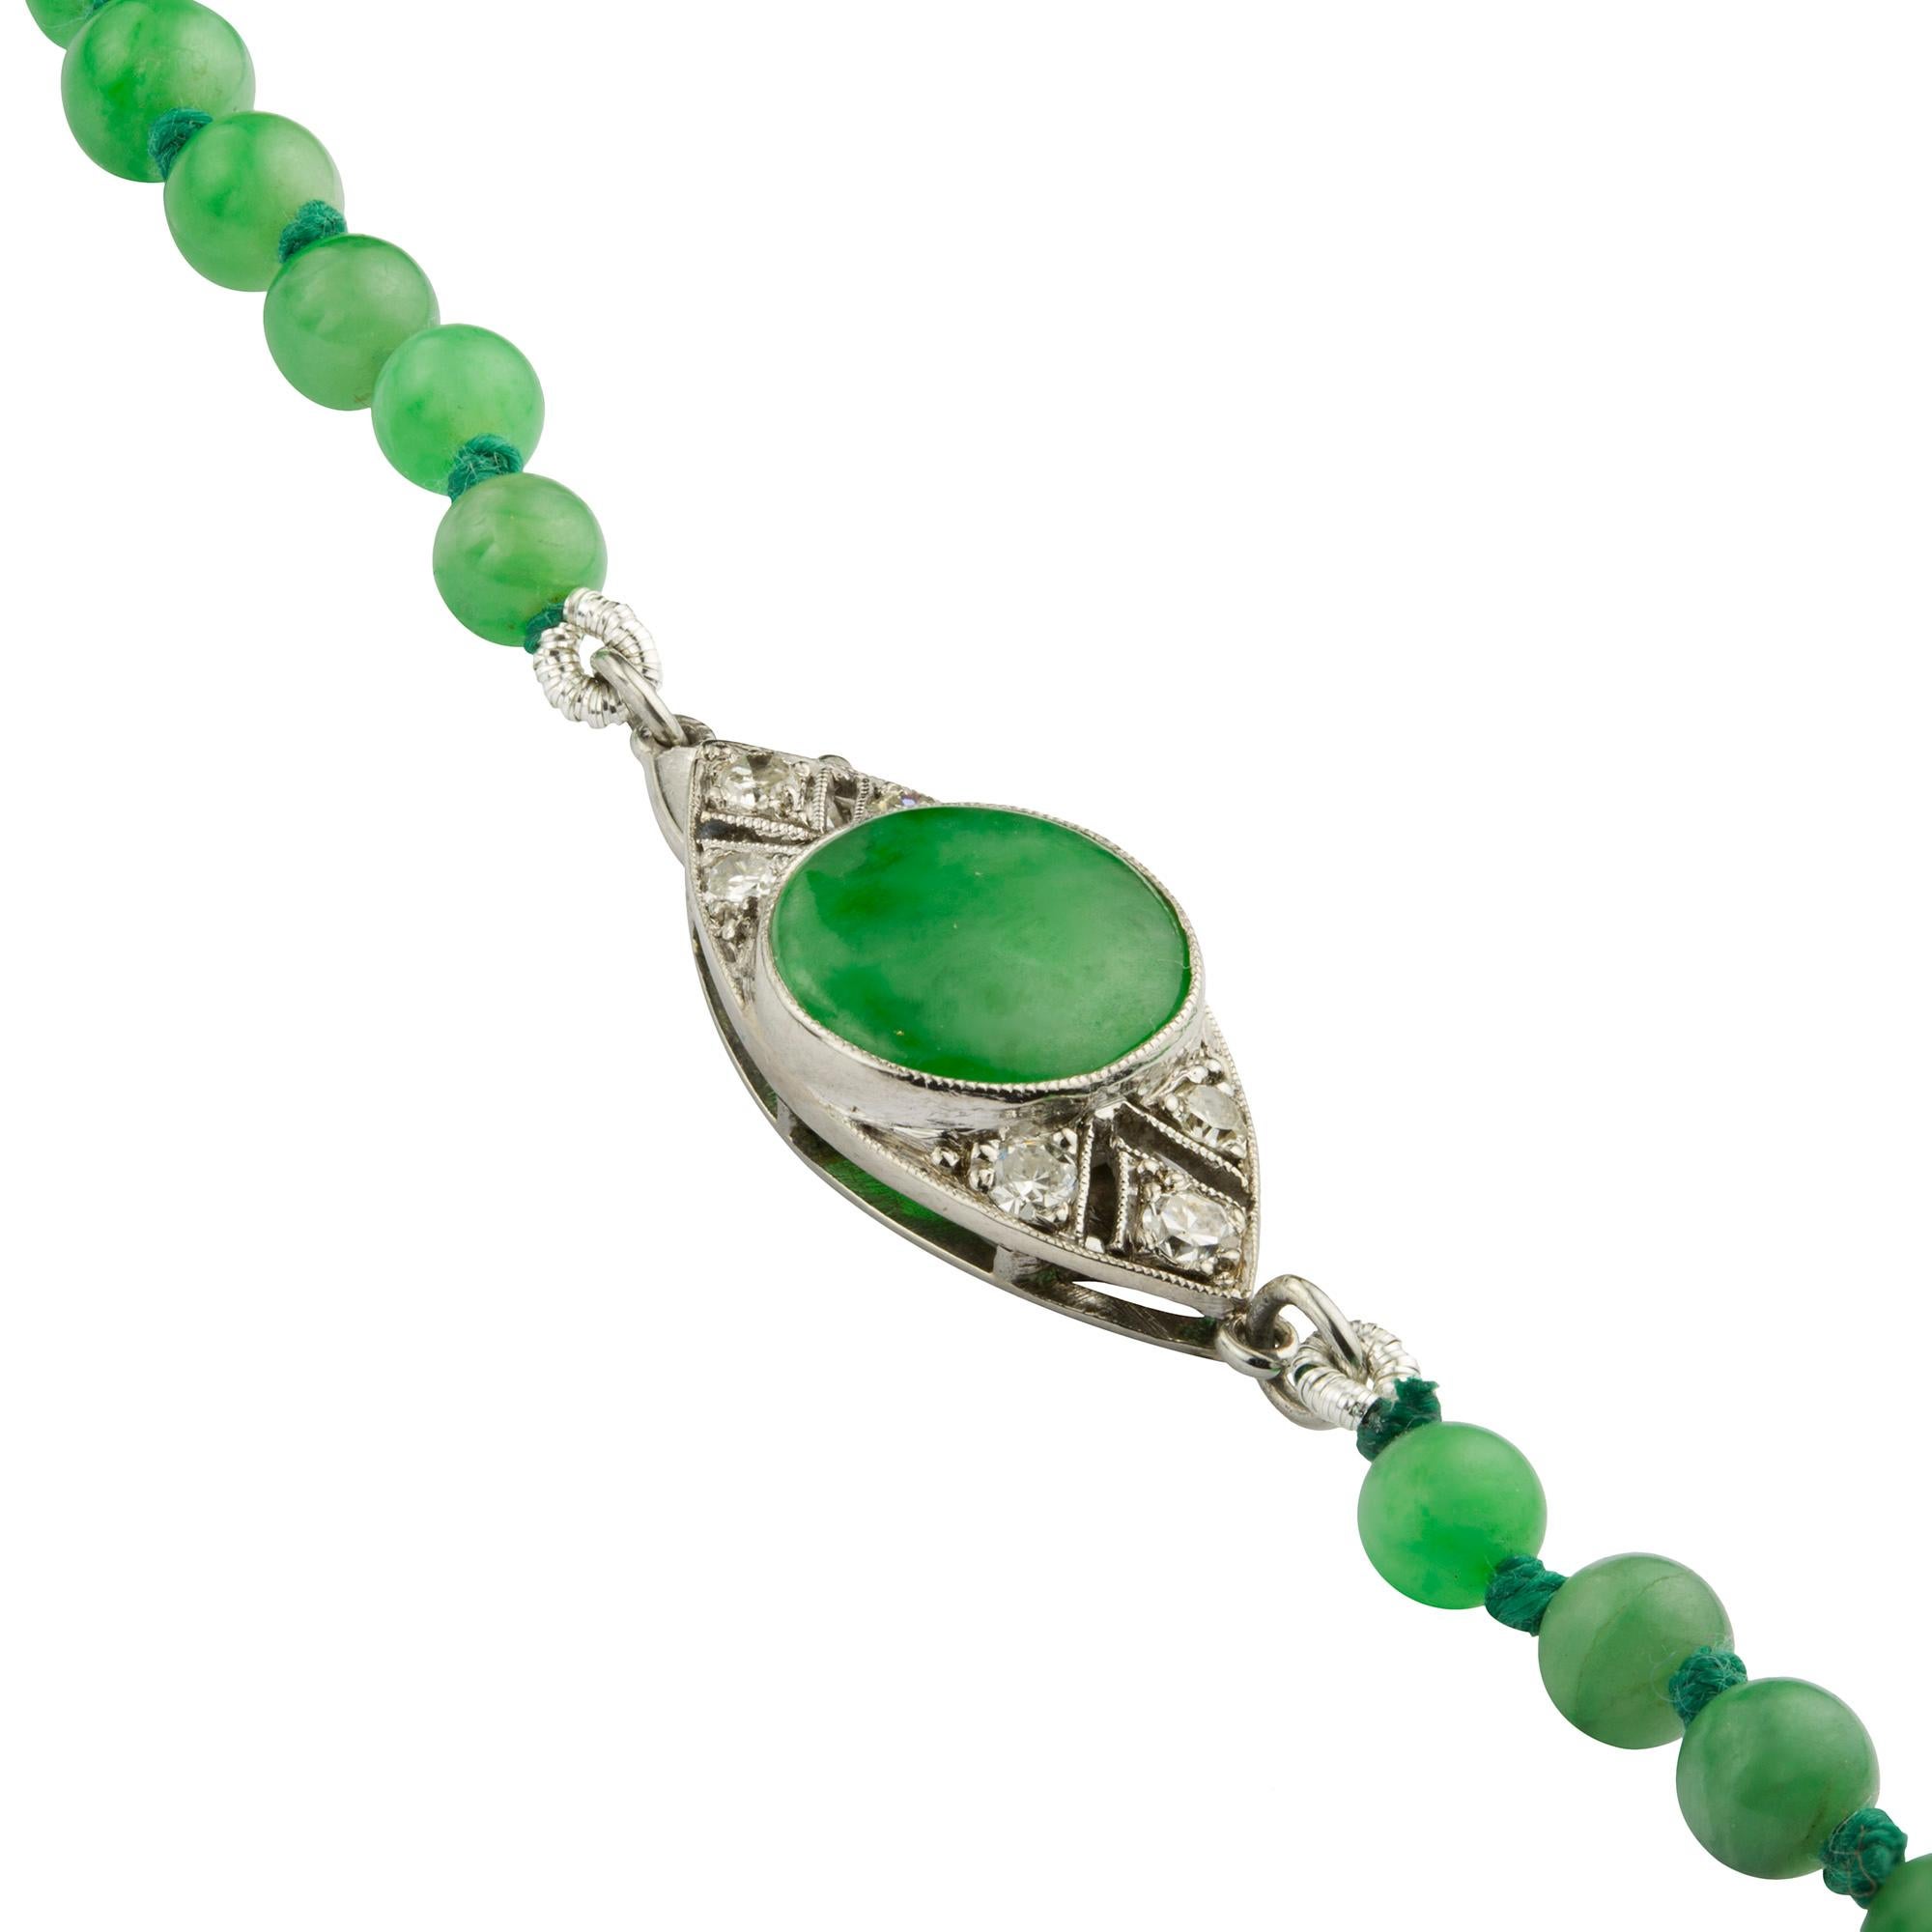 A graduate jadeite jade bead necklace with Art Deco clasp, the seventy-seven beads graduating from the centre, measuring approximately 9.3 to 3.8mm in diameter, all strung and knotted to an Art Deco navette-shaped clasp, centrally set with a round